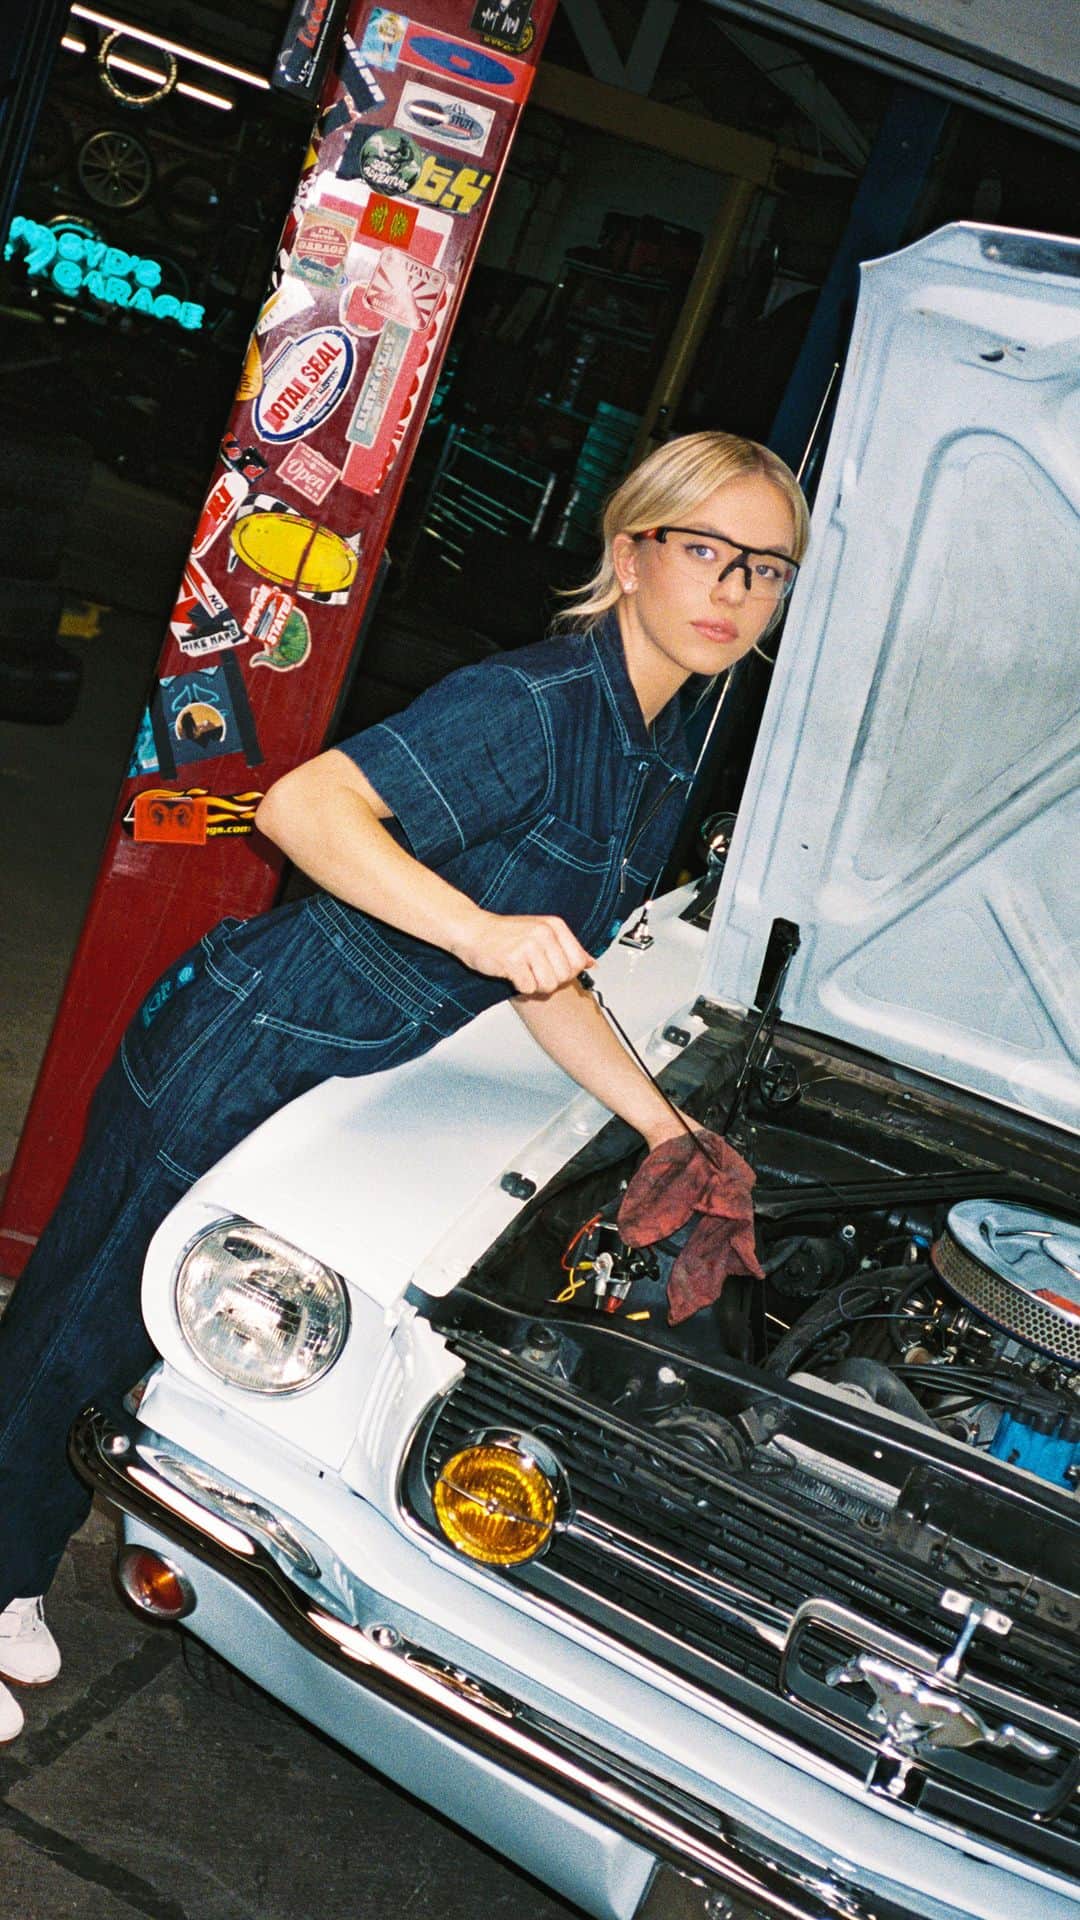 Fordのインスタグラム：「Spend a day in the garage with @sydney_sweeney as she does some maintenance work on her vintage Ford Mustang®. Want to shop the look? Limited-edition coveralls are up on the IG shop now.」